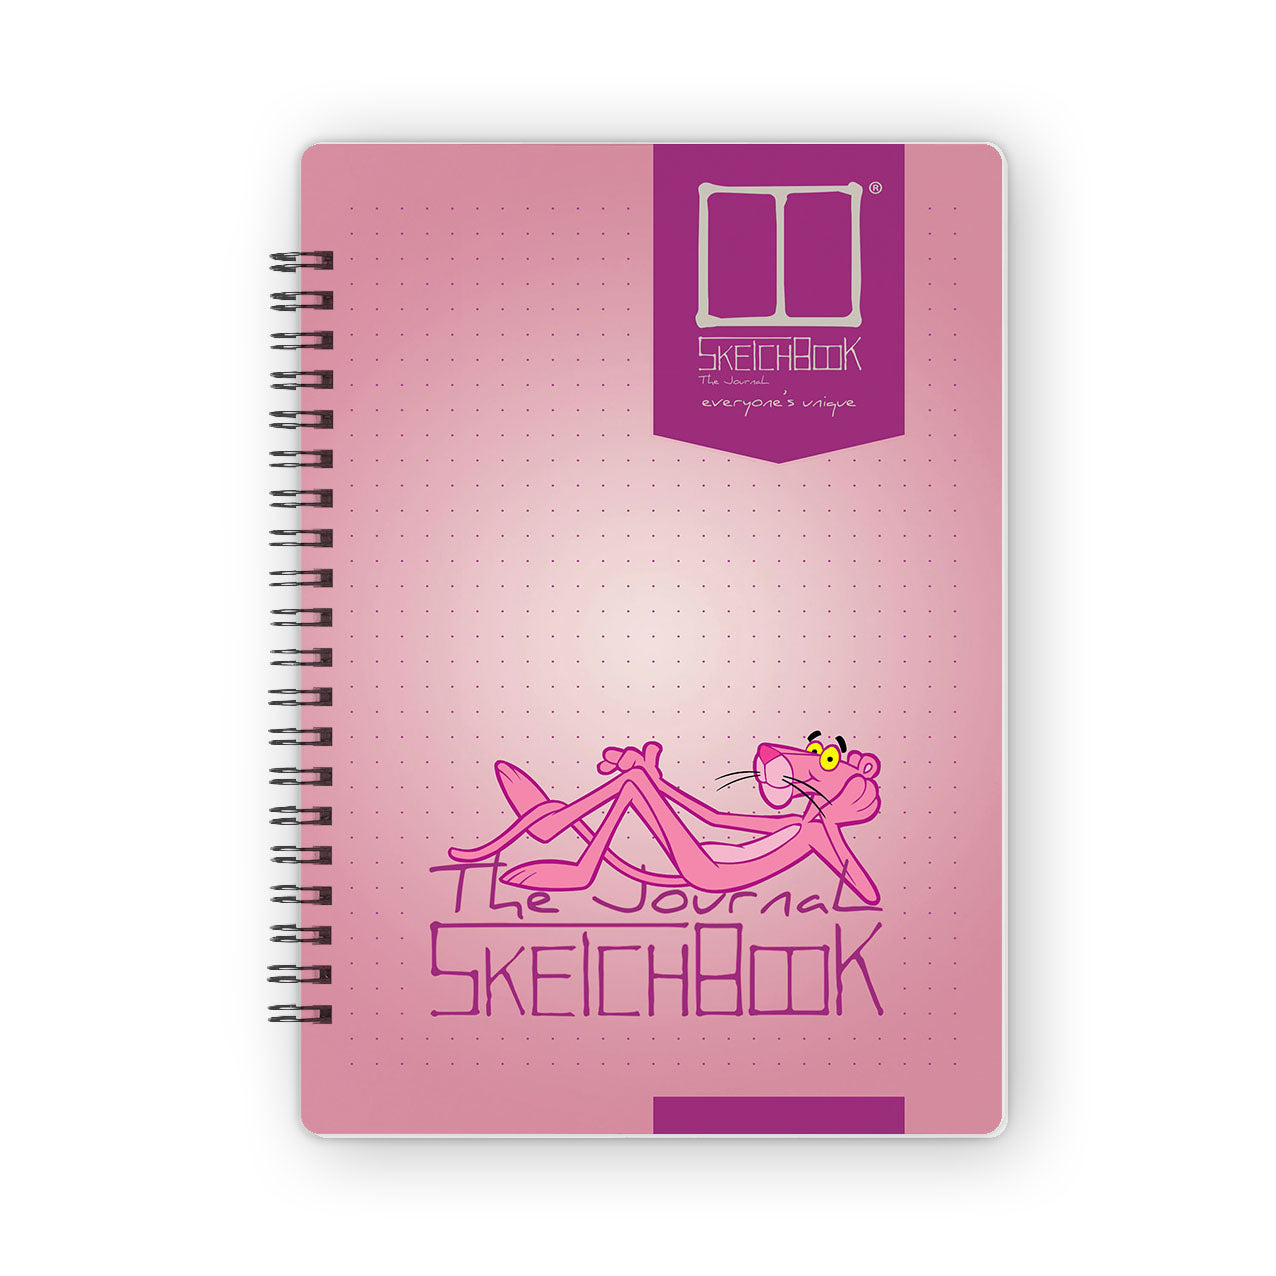 The Journal | 20 X 14 cm - Pink Panther - from SketchBook Stationery